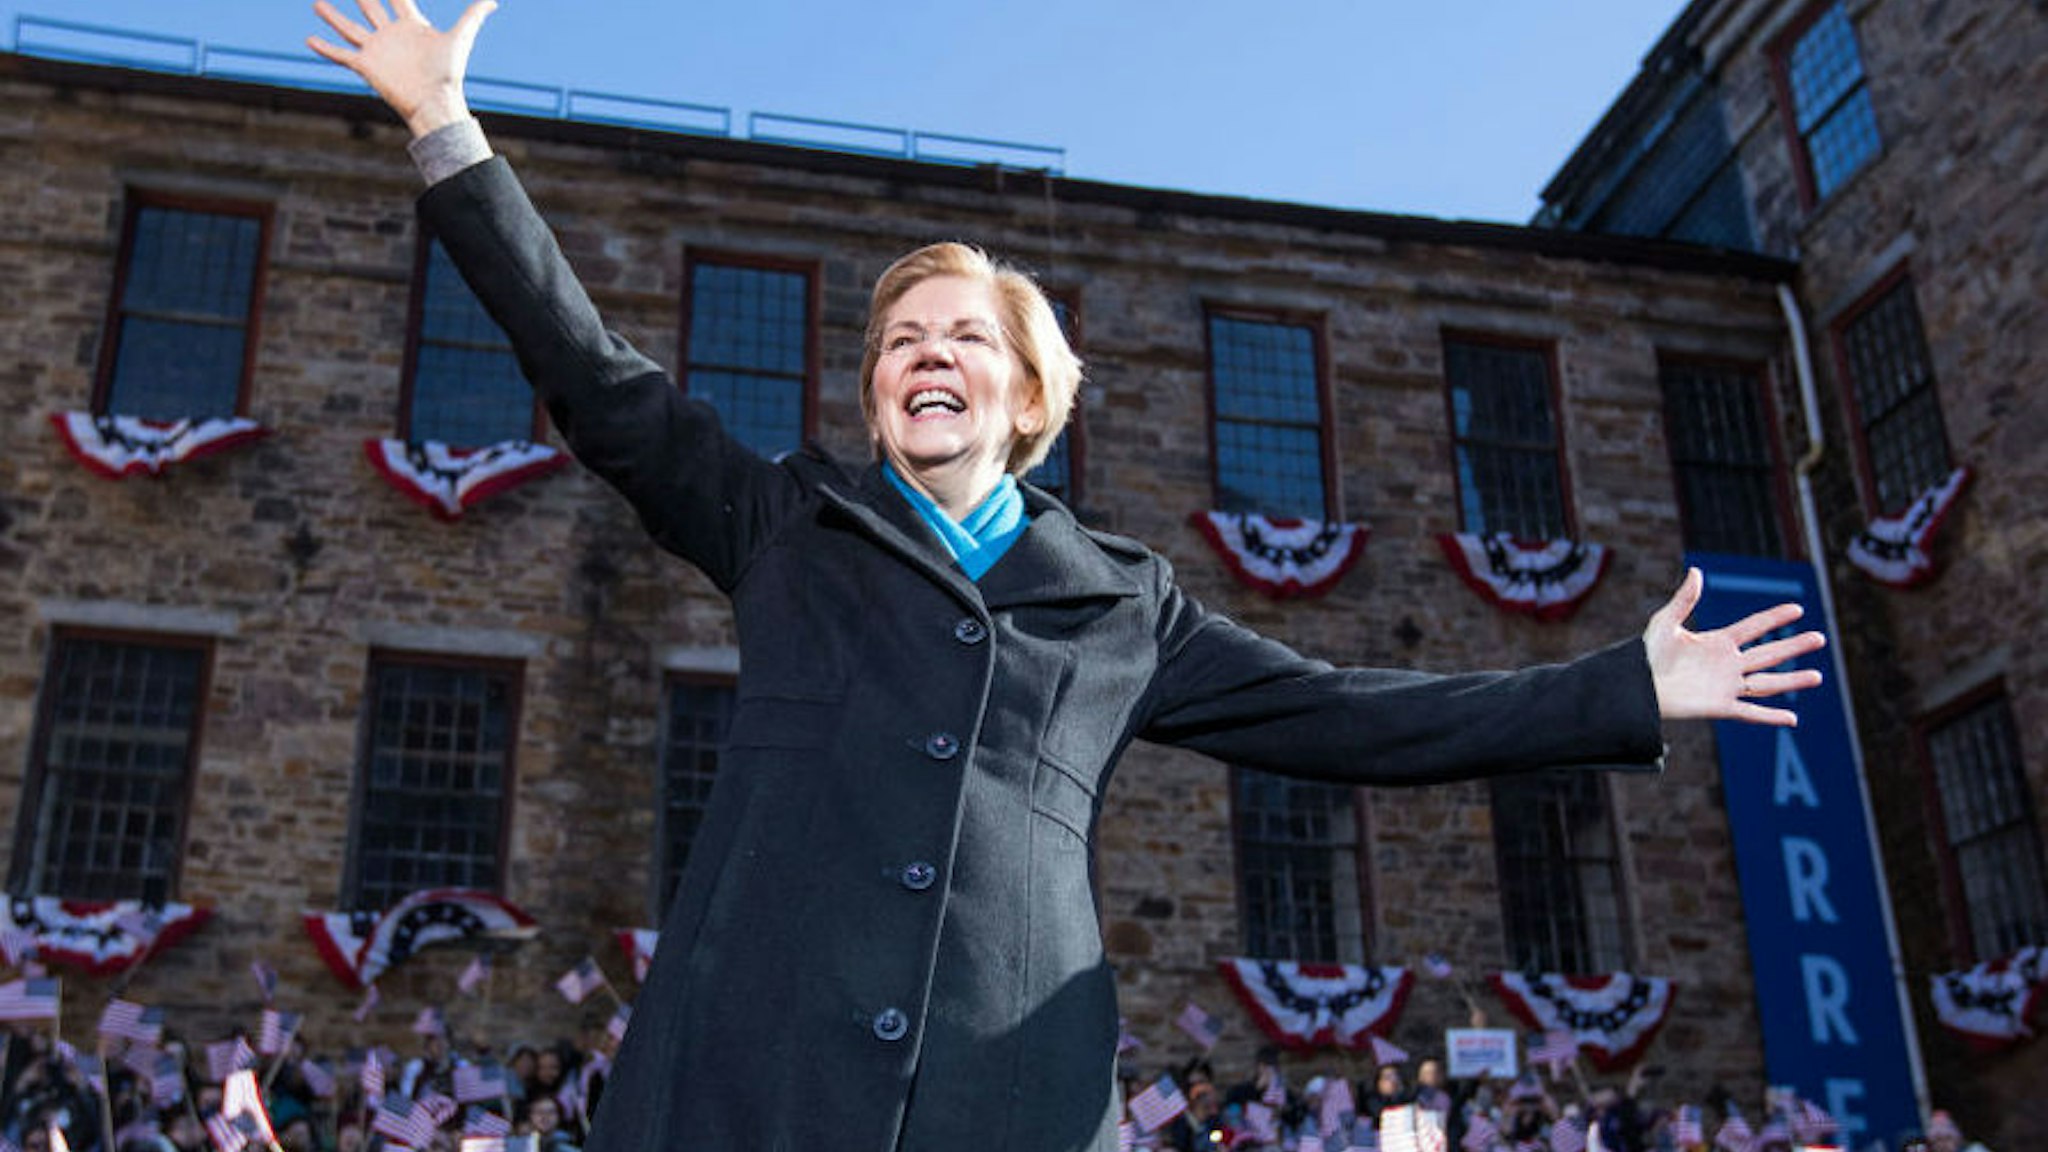 LAWRENCE, MA - FEBRUARY 09: Sen. Elizabeth Warren (D-MA), announces her official bid for President on February 9, 2019 in Lawrence, Massachusetts. Warren announced today that she was launching her 2020 presidential campaign. (Photo by Scott